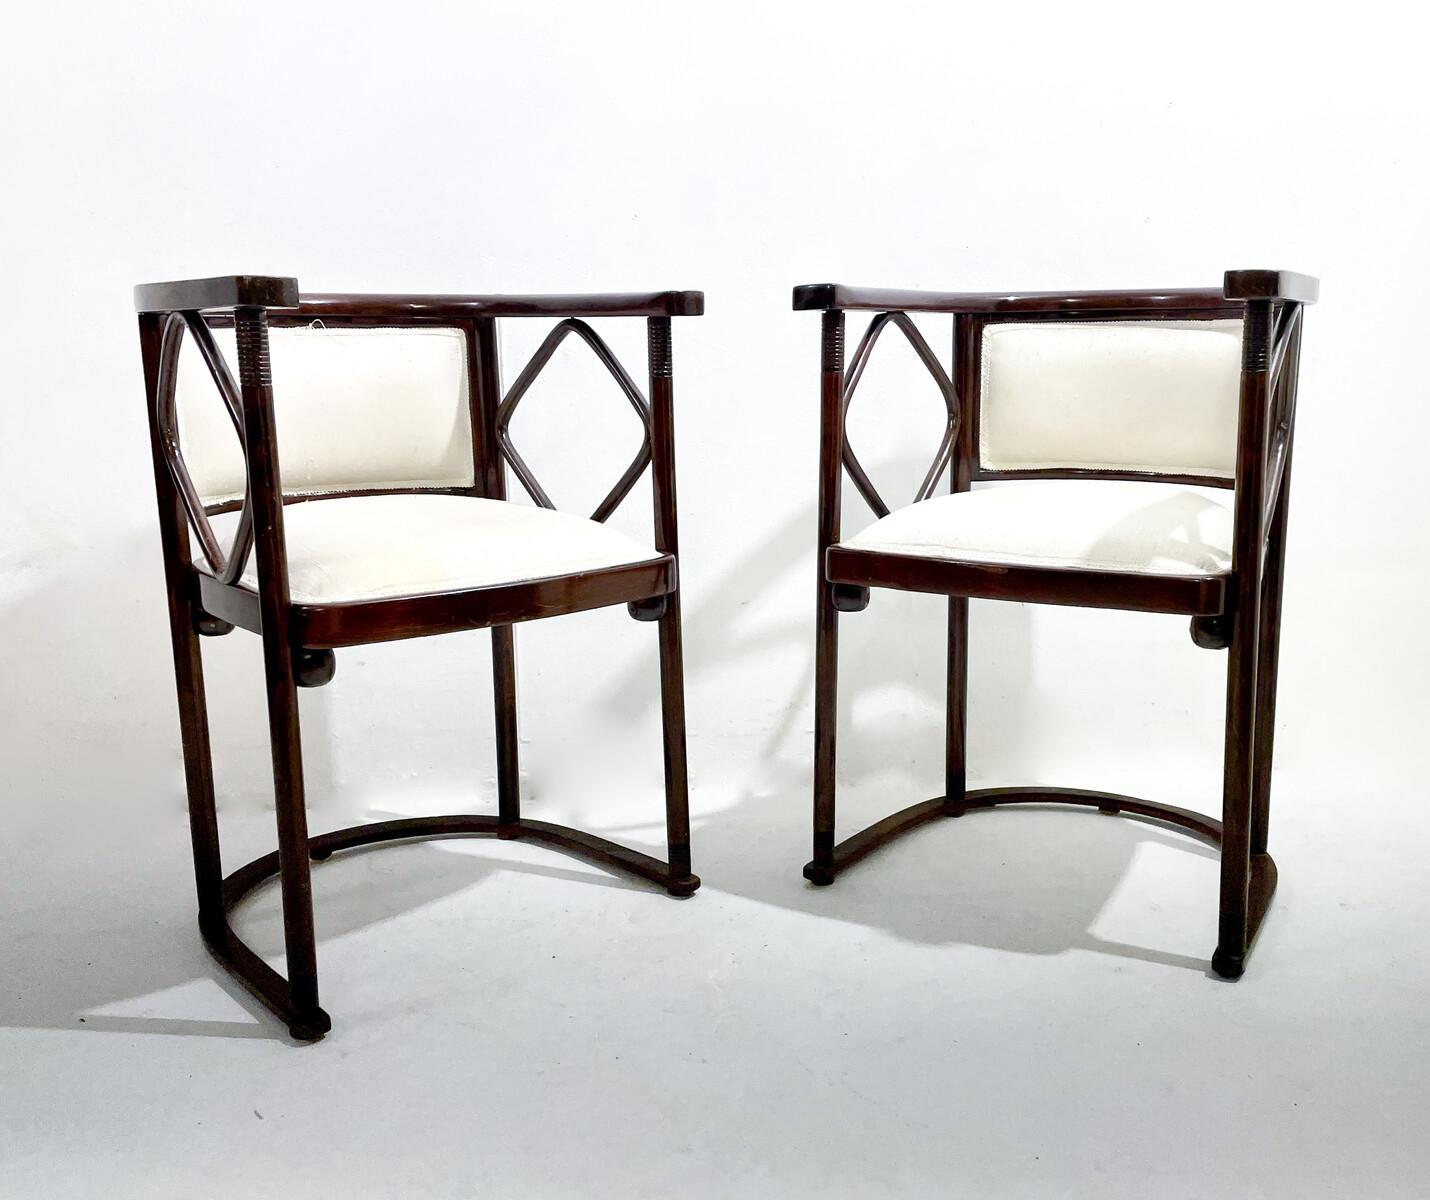 Early 20th Century Pair of Armchairs by Josef Hoffmann, Cabaret Fledermaus, Hungary, 1900s